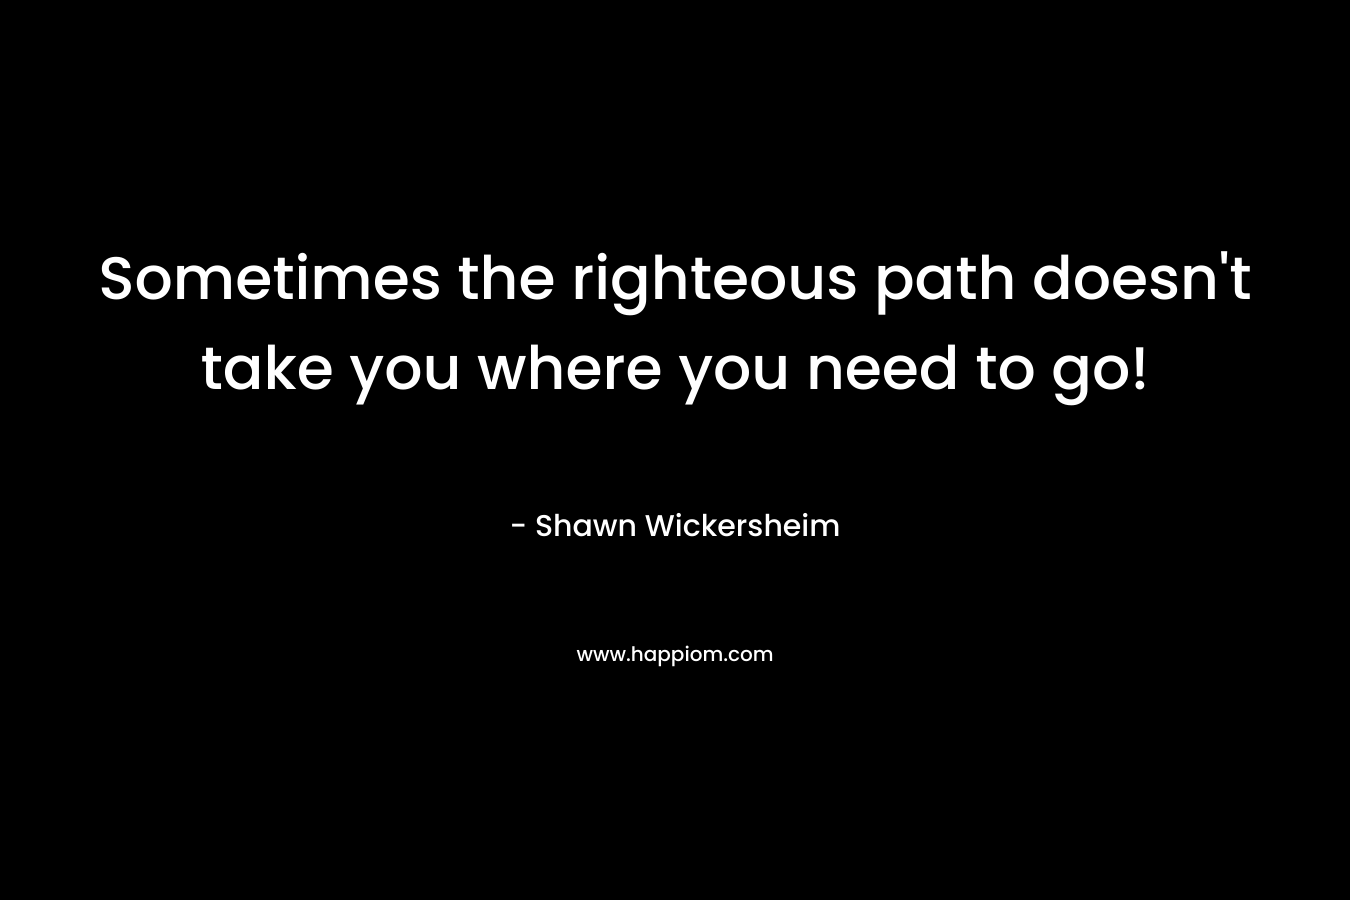 Sometimes the righteous path doesn’t take you where you need to go! – Shawn Wickersheim